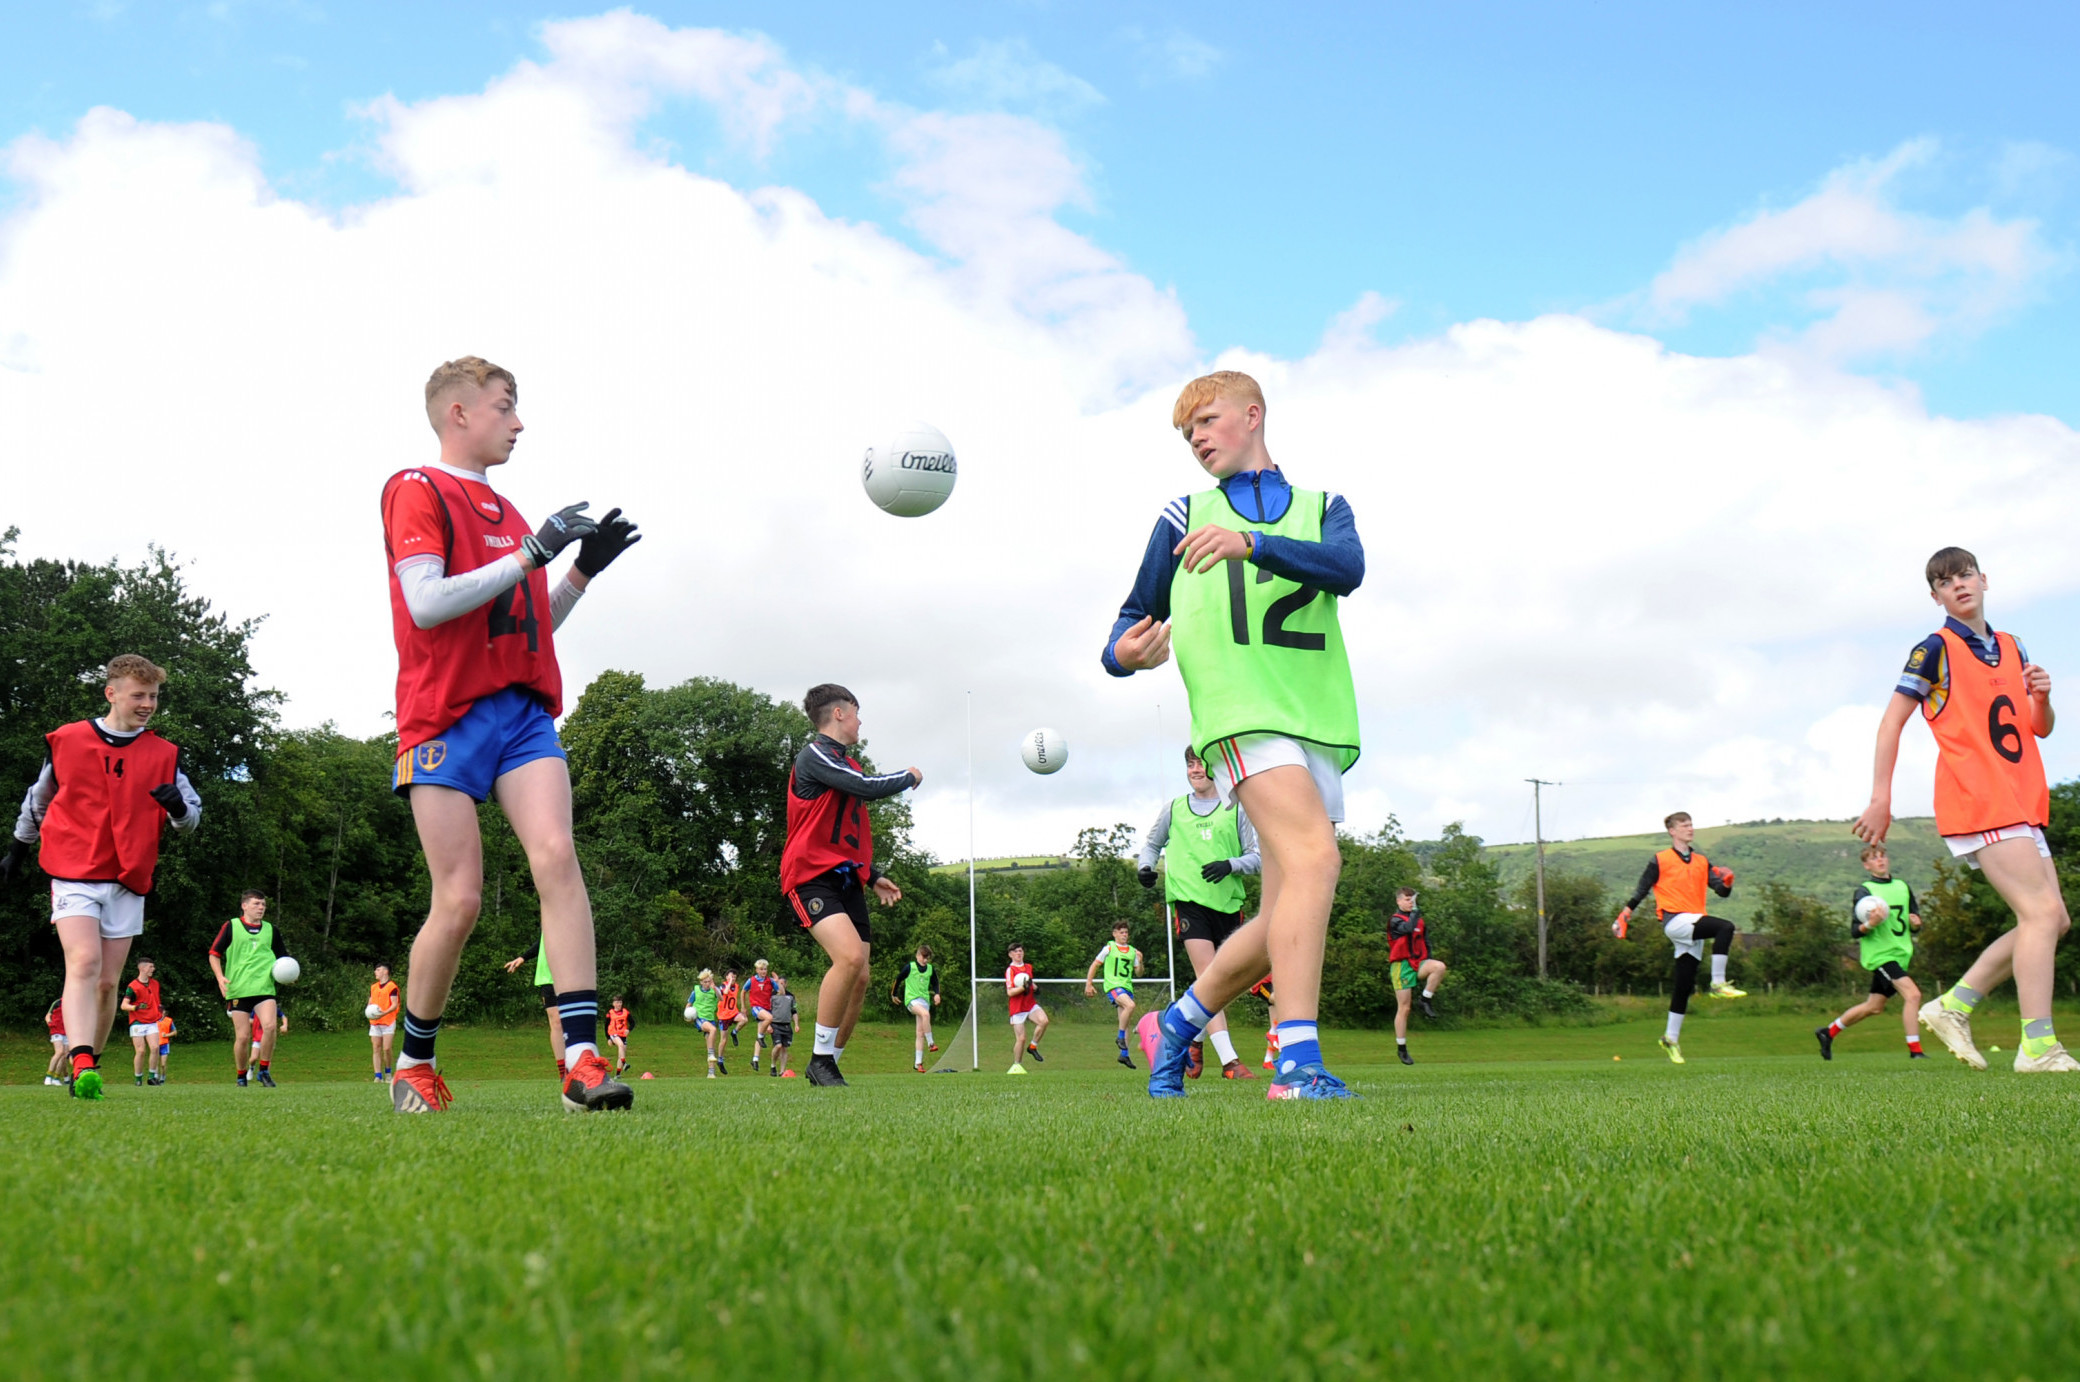 Upcoming Ulster GAA Coaching & Games Camps for Football, Hurling and Disability Inclusion